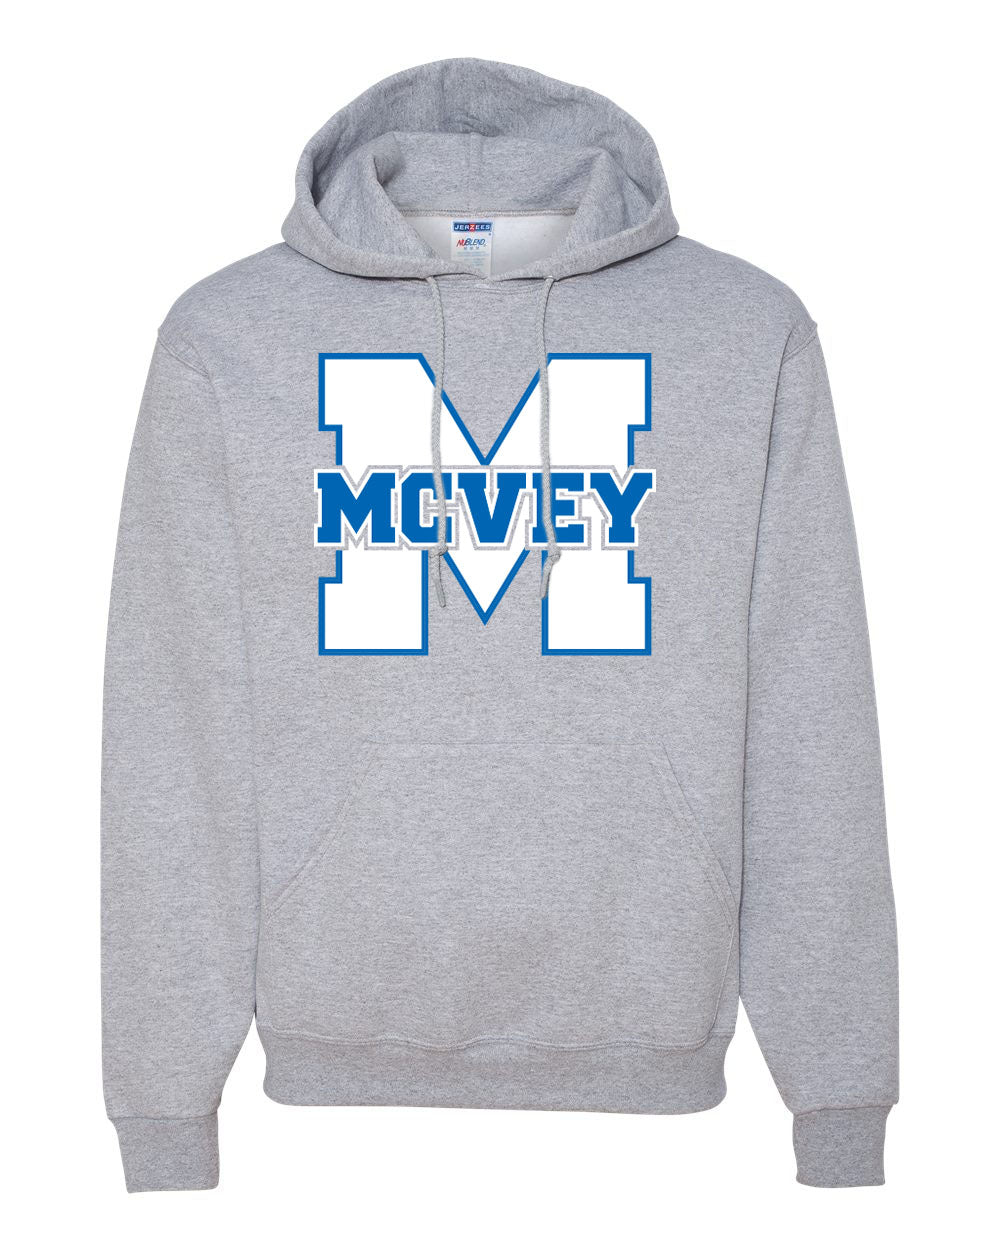 New! MCVEY Youth/Adult Pullover Hoodie (additional colors available)